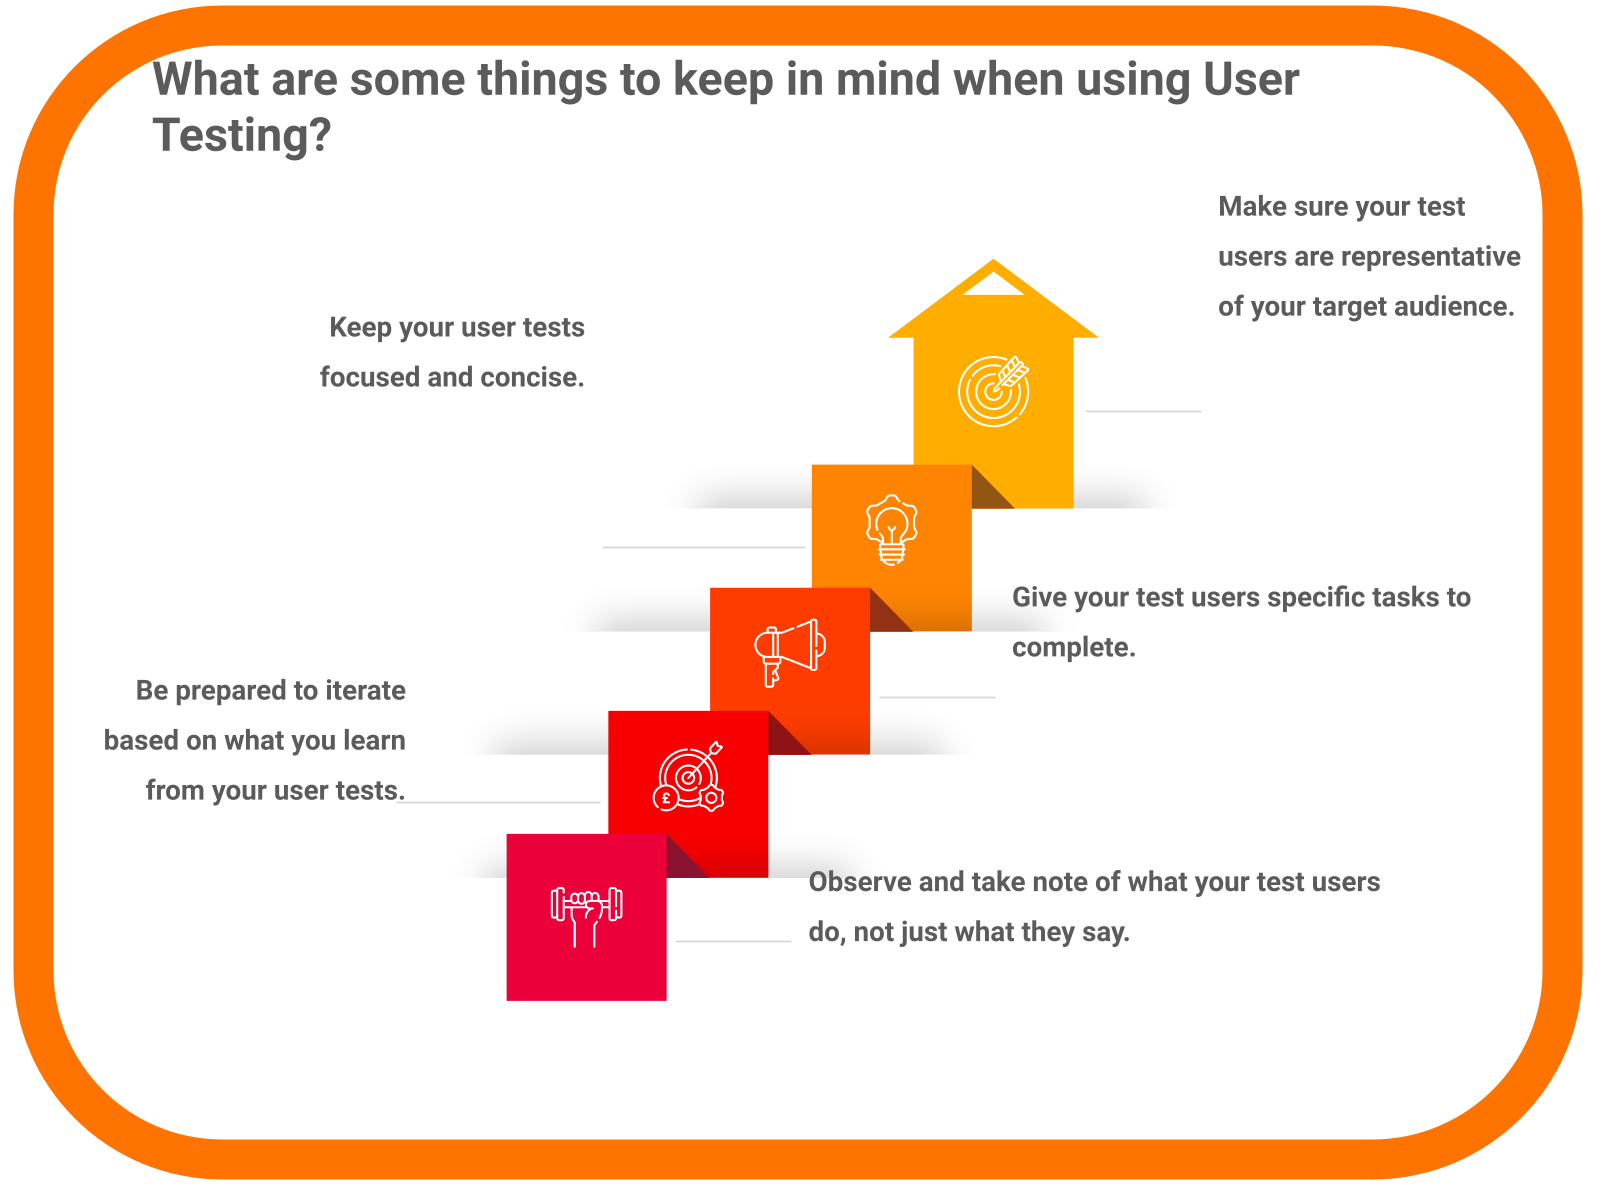 How to interpret the results of a user testing session